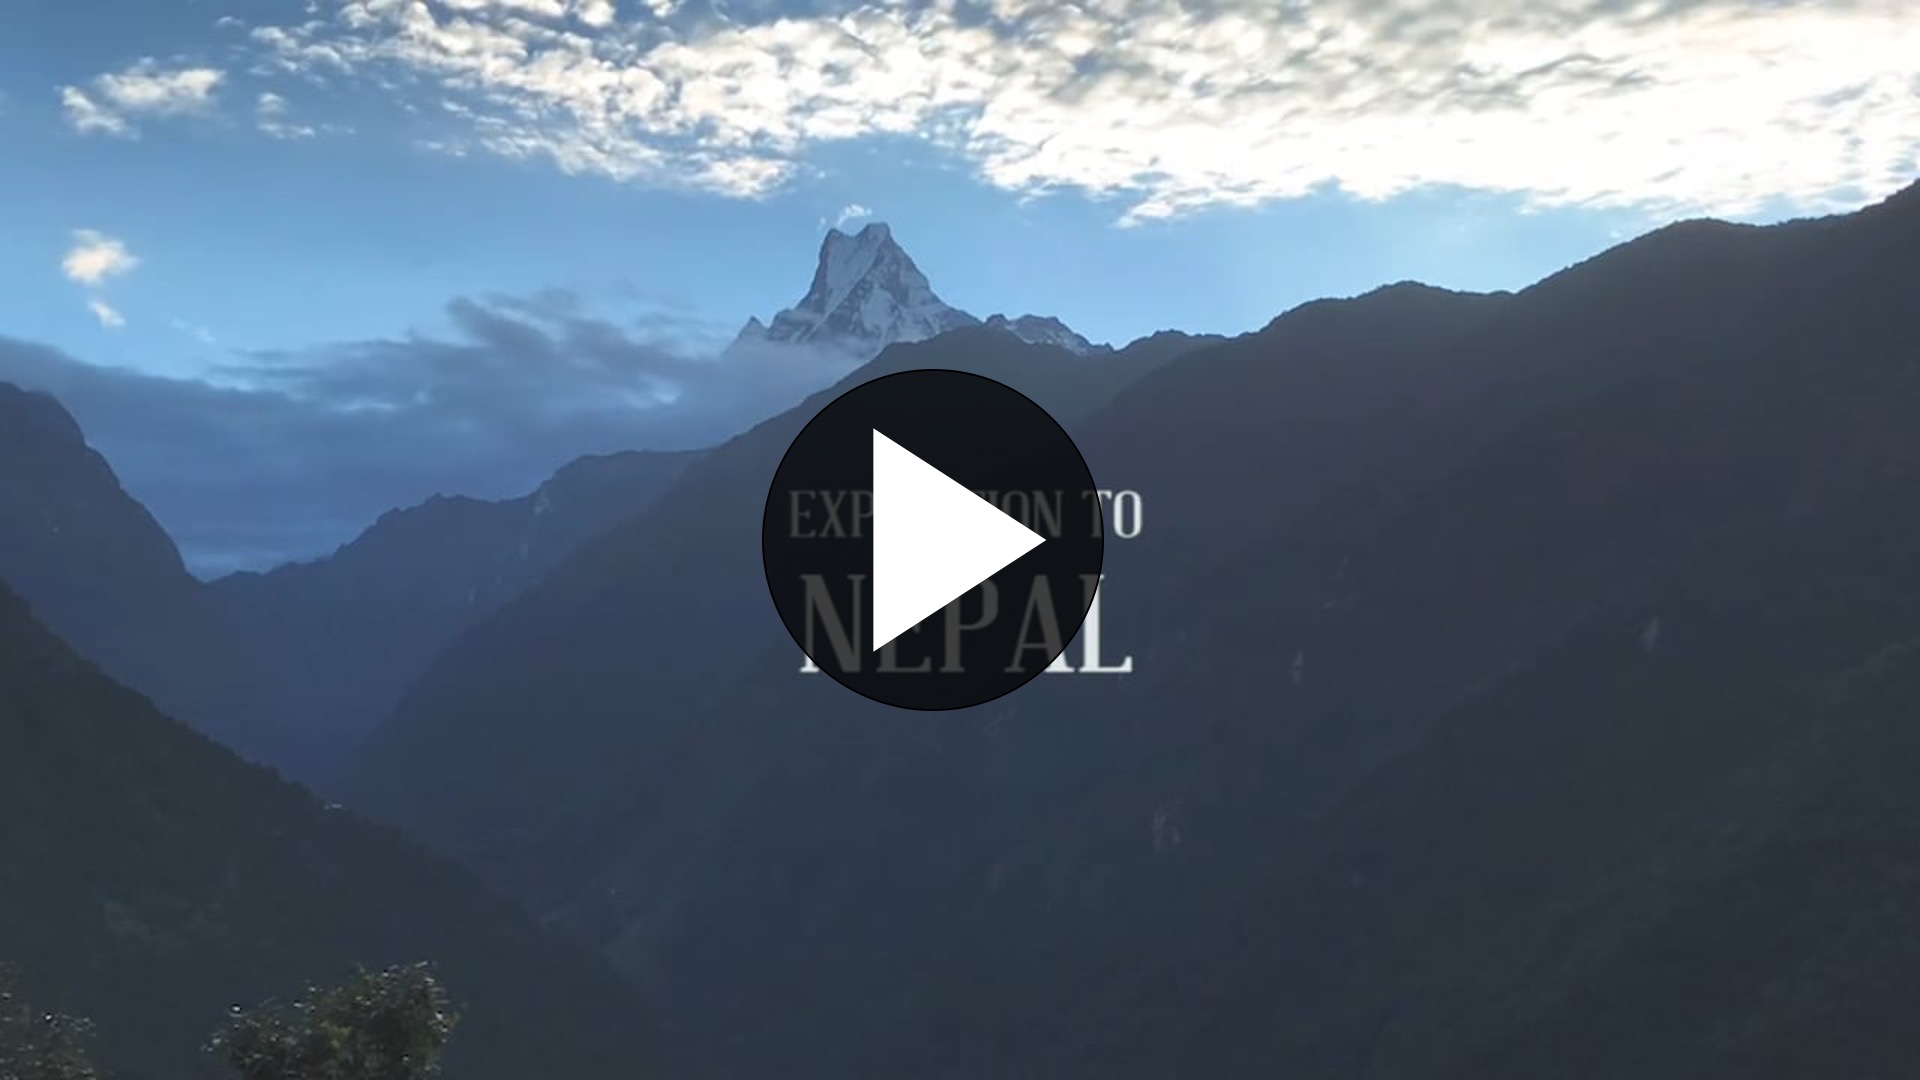 Nepal expedition documentary - click to play